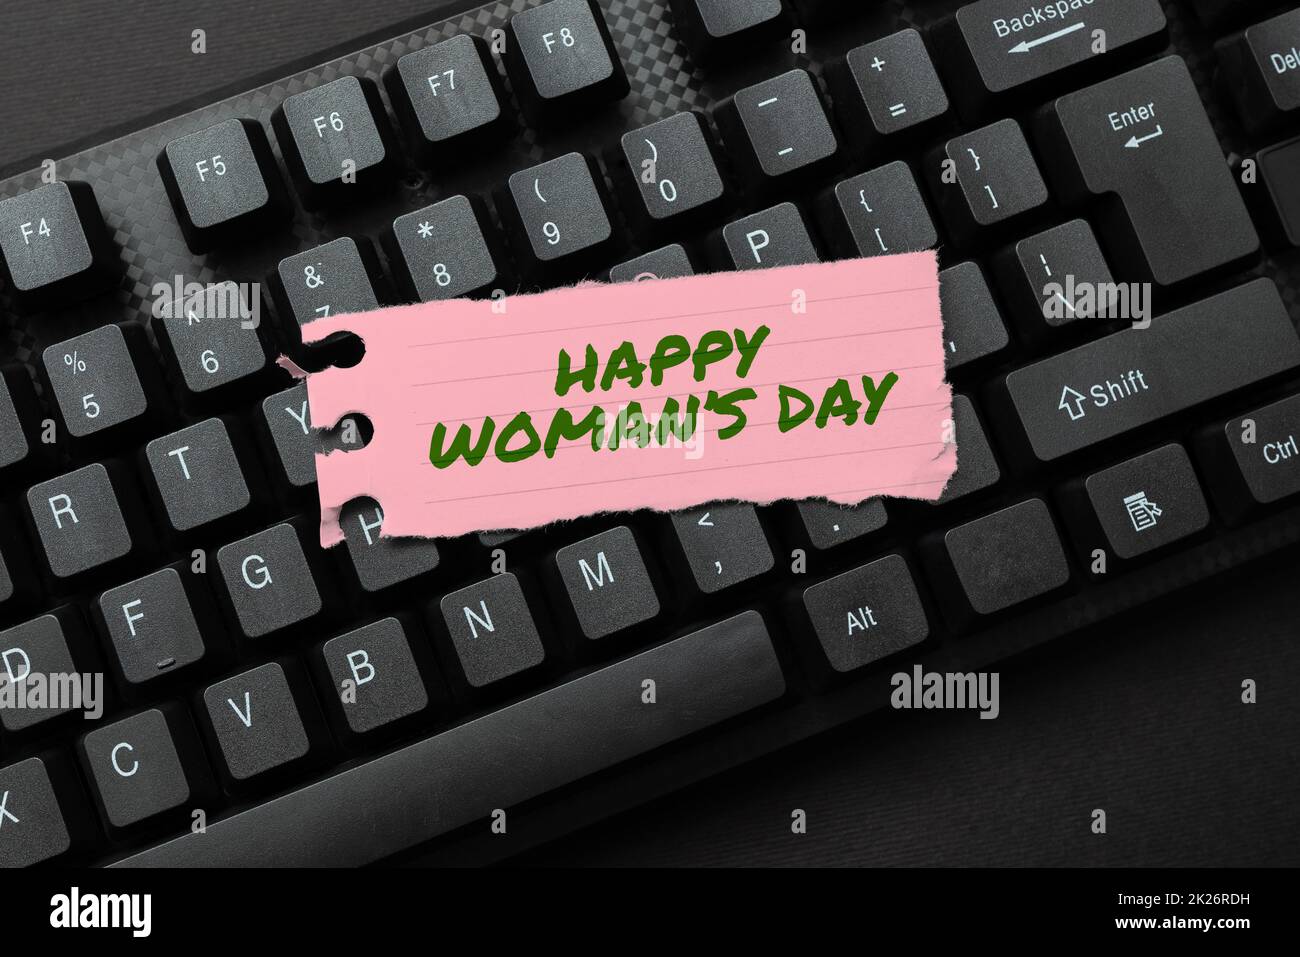 Text showing inspiration Happy Woman S Day. Internet Concept to commemorate the essence of every lady around the world Editing And Retyping Report Spelling Errors, Typing Online Shop Inventory Stock Photo